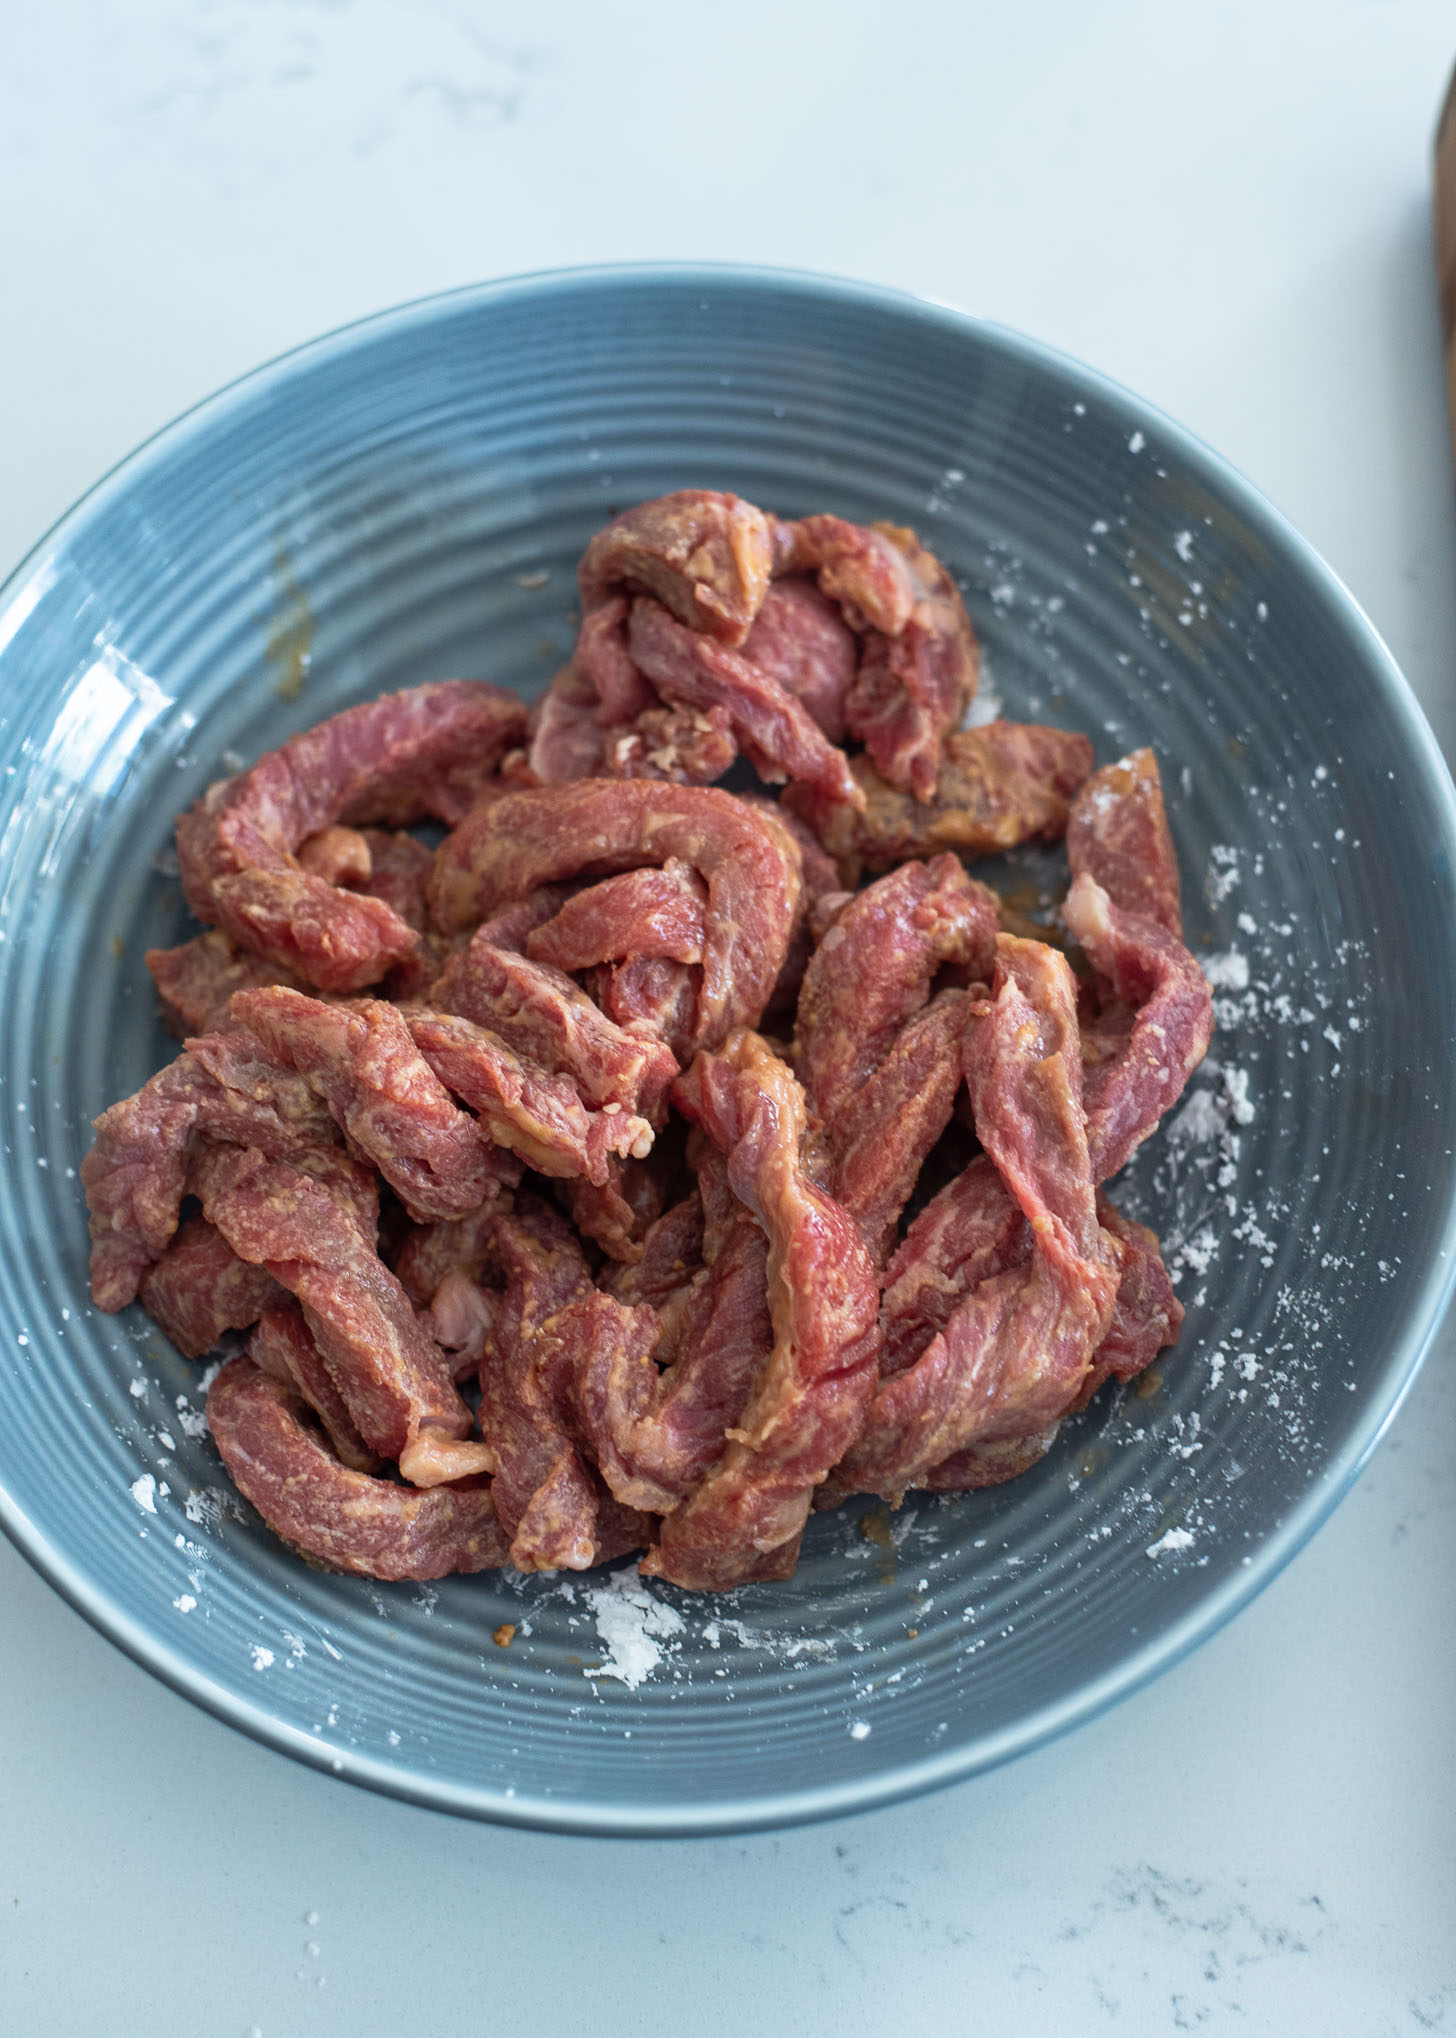 Beef strips for crispy beef are seasoned in a bowl.